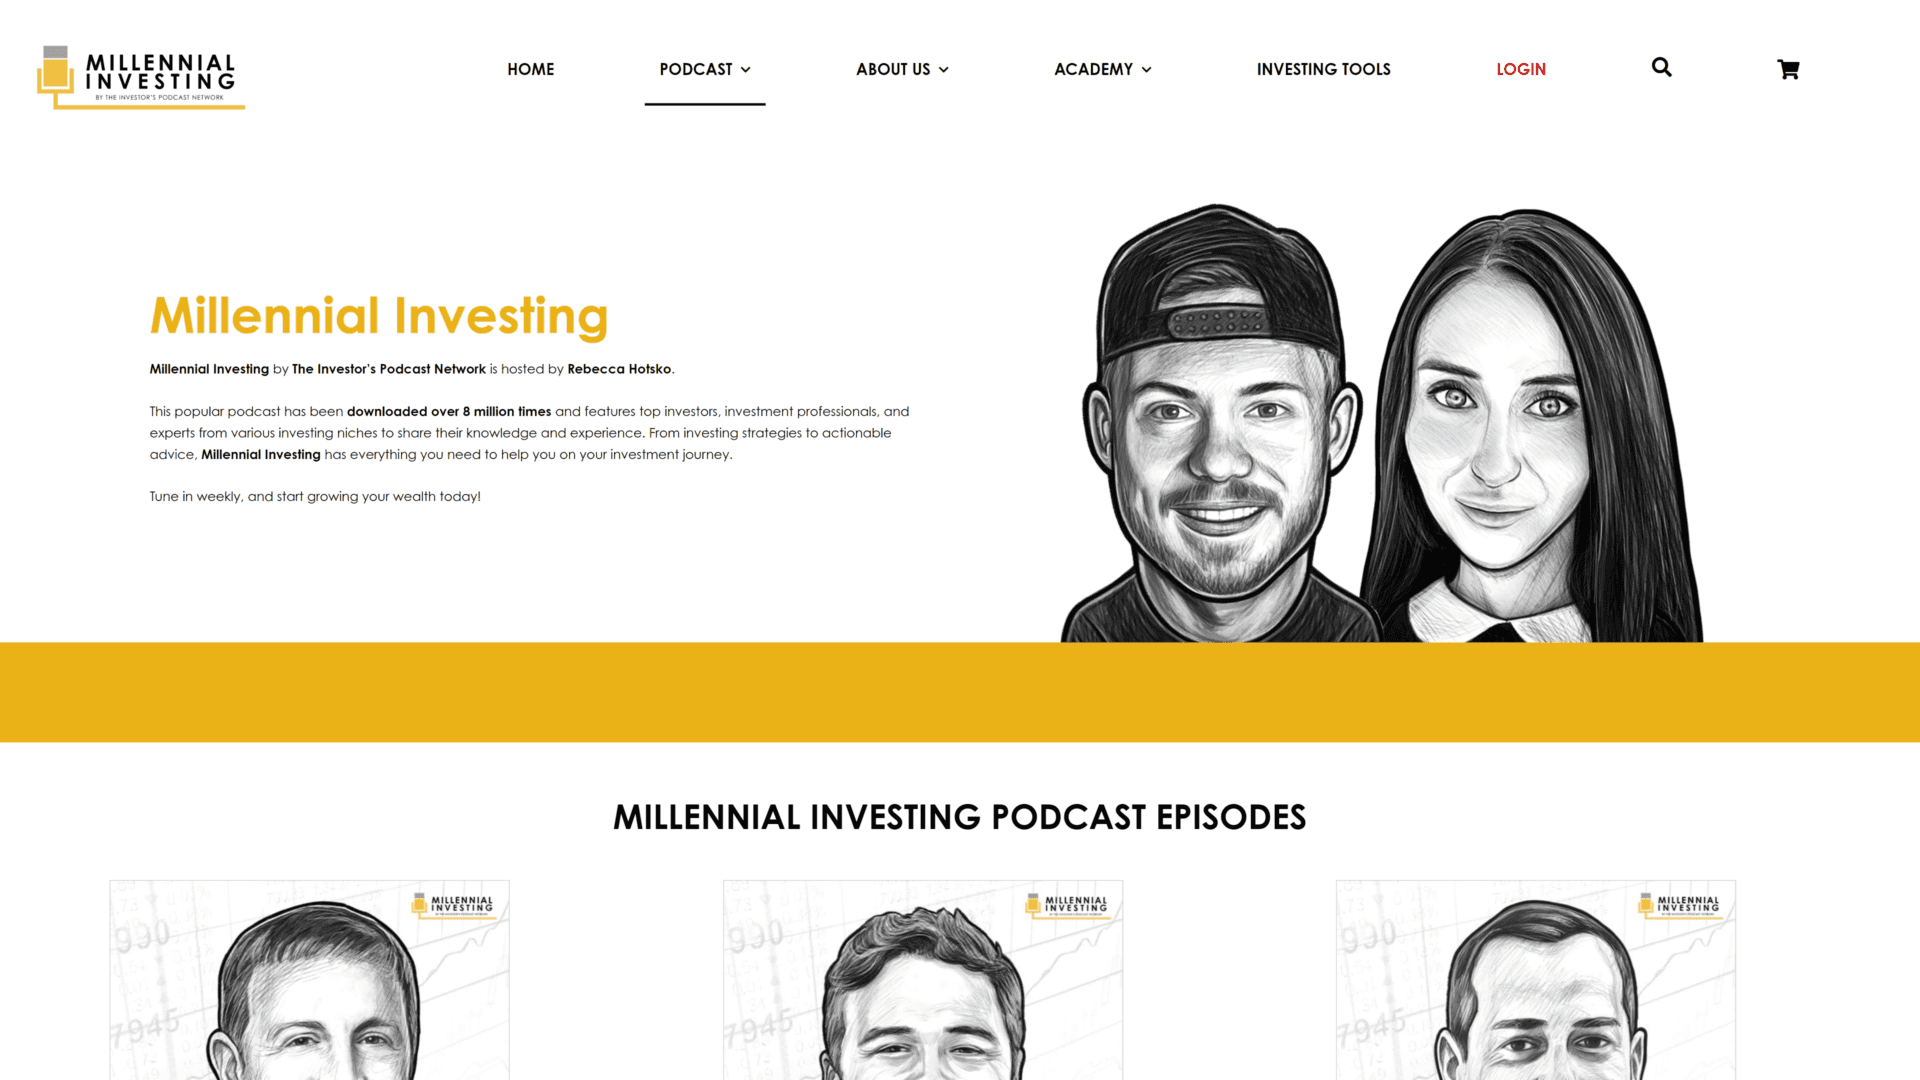 A screenshot of the millennial investing homepage